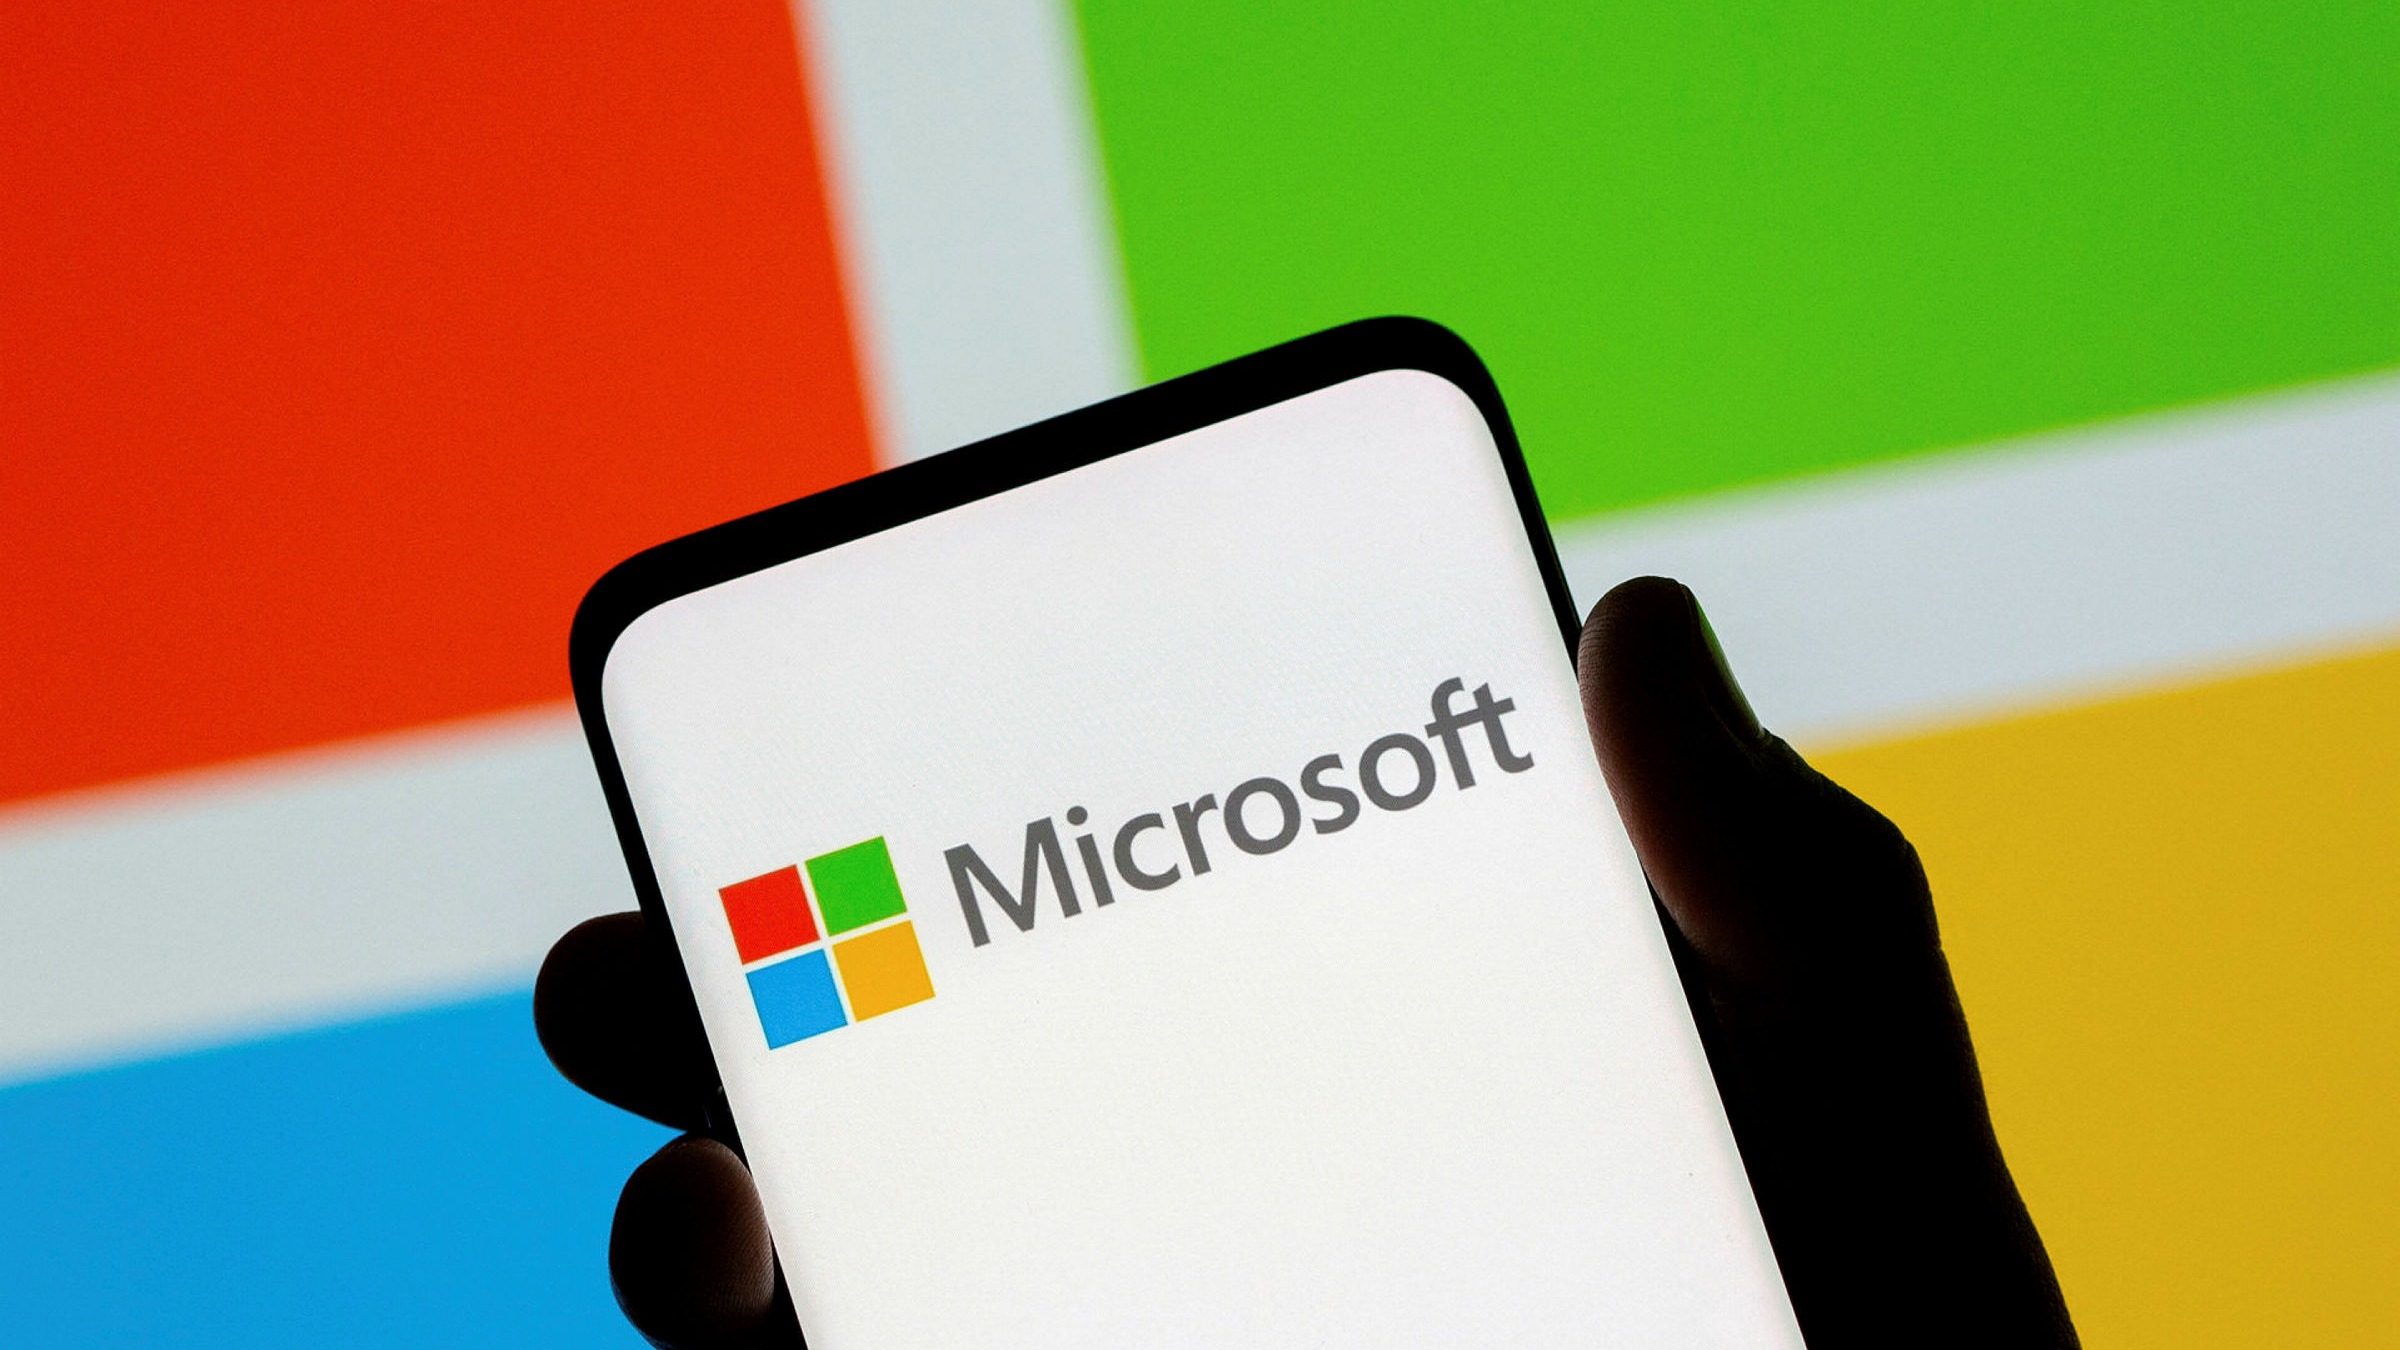 image-Crypto Scammers Are Getting More Creative, Microsoft Warns of New Threats